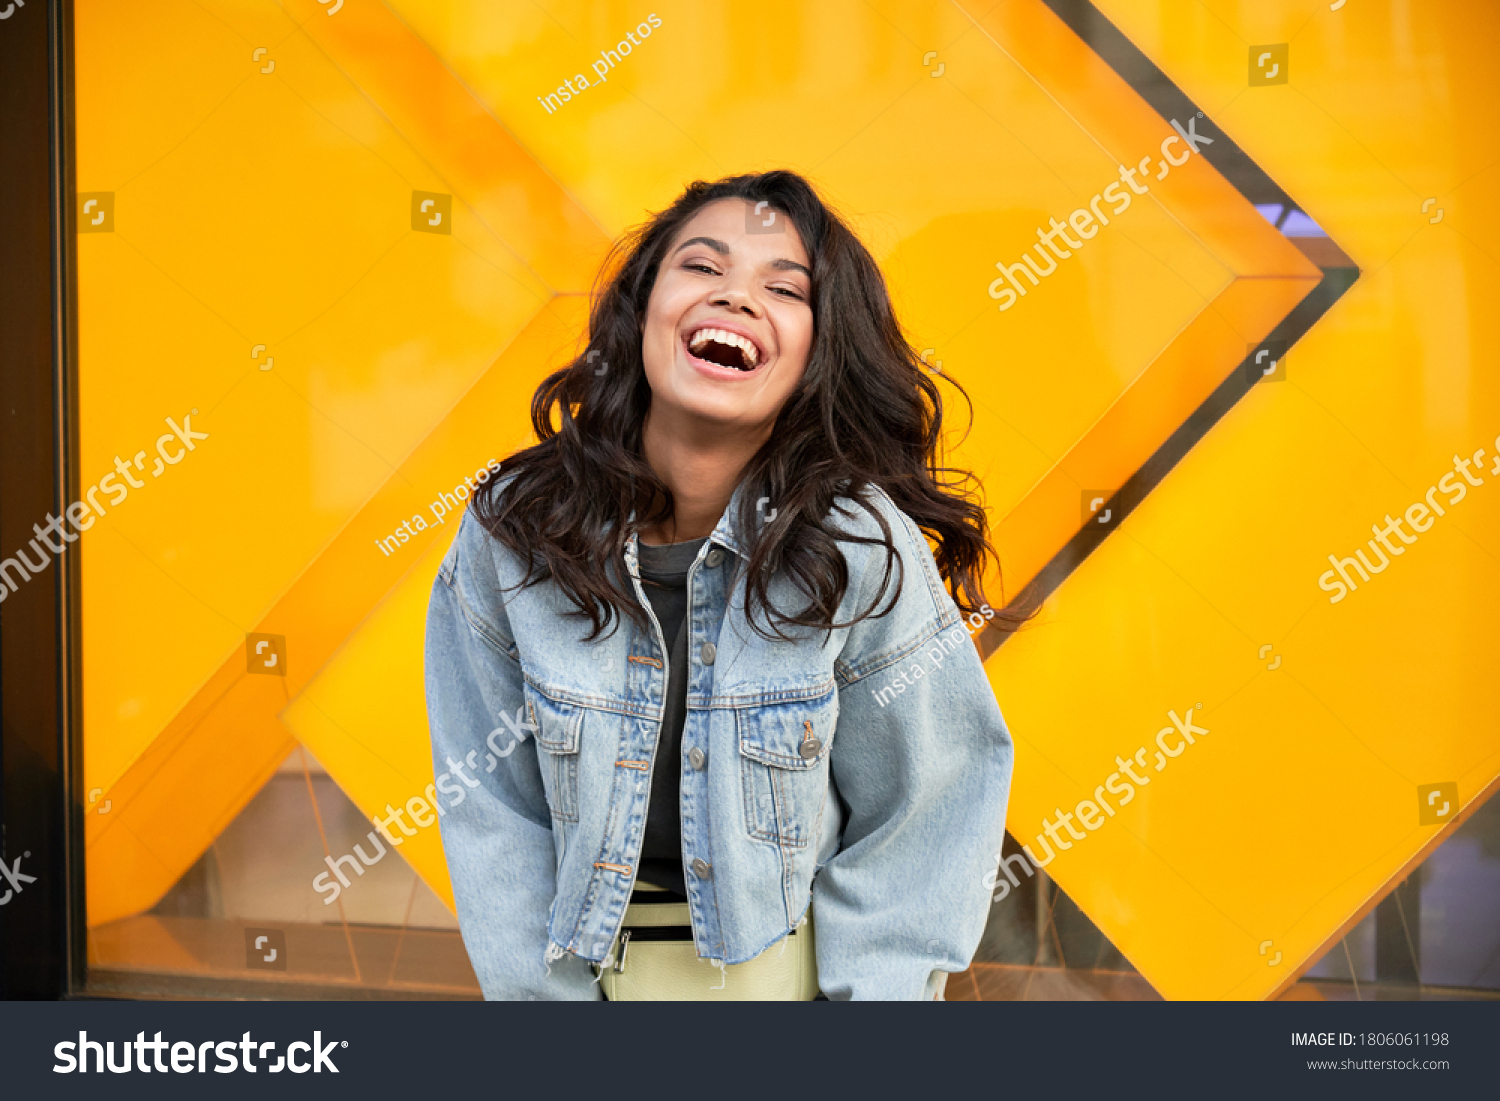 Happy African American woman wearing denim jacket laughing looking at camera standing near city street building. Smiling positive mixed race generation z hipster lady posing outdoor. #1806061198